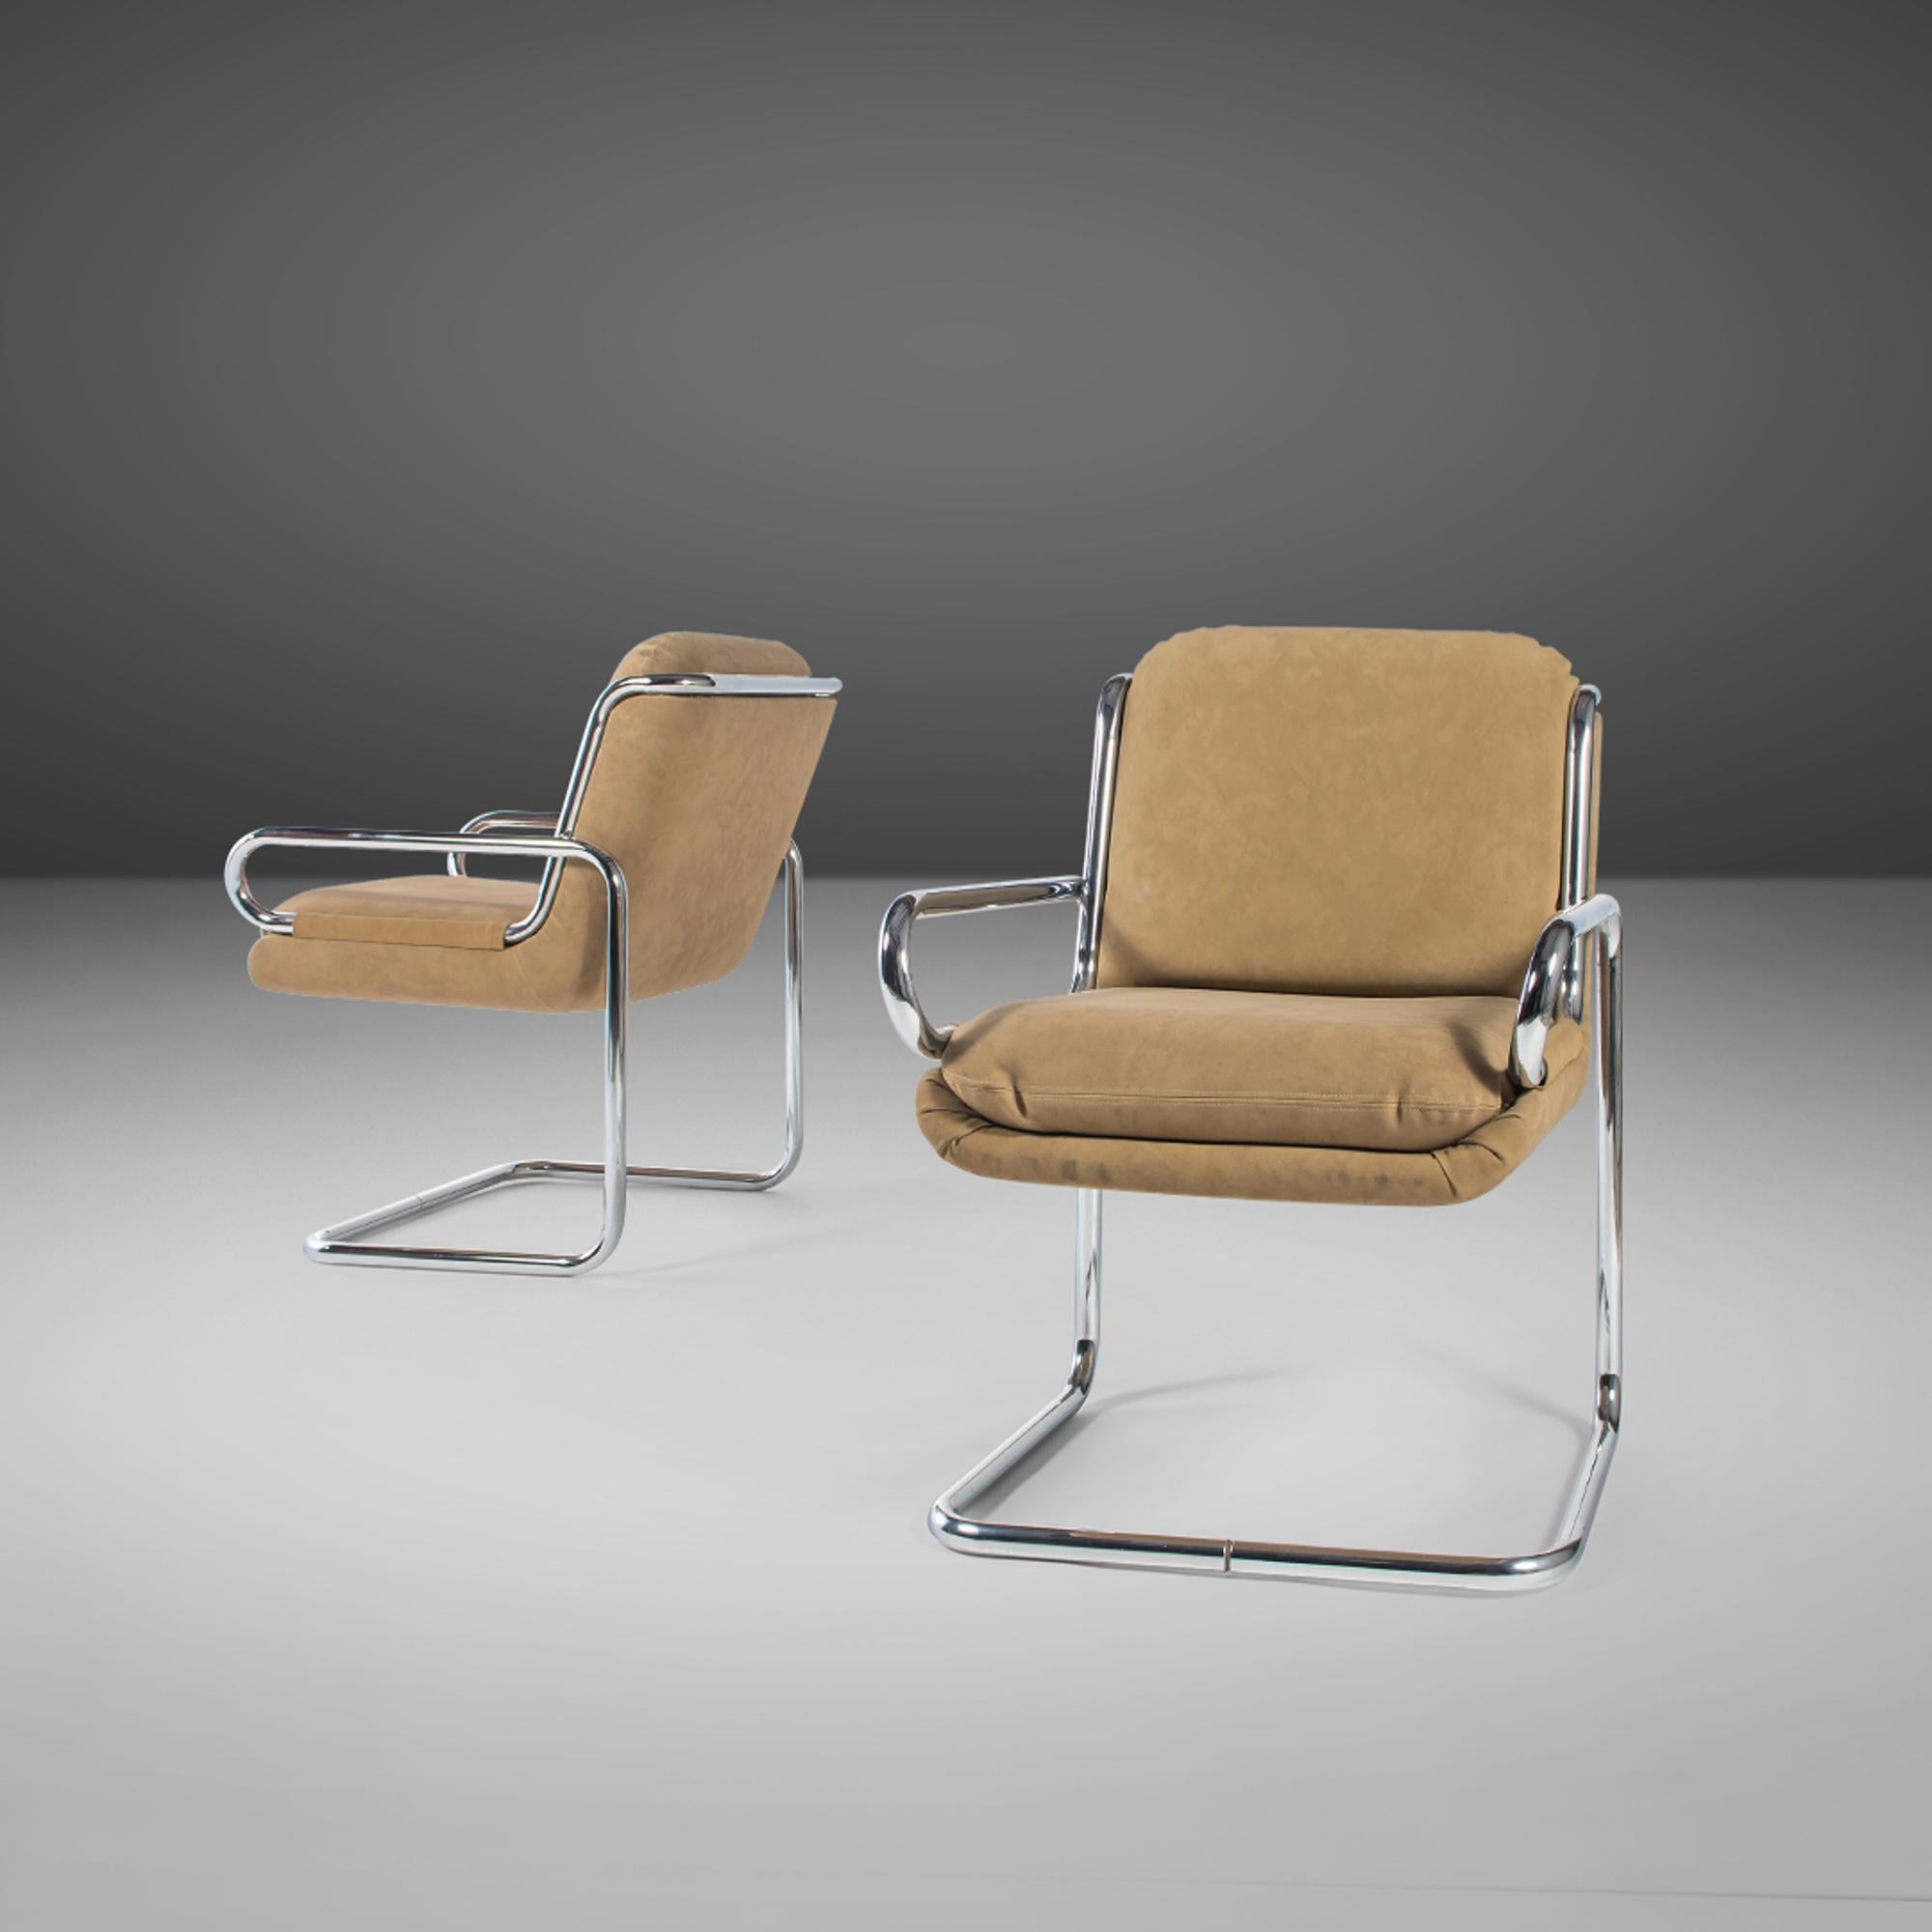 Pair of Lounge Chairs Tubular Chrome Lounge Chairs by Dunbar Dux, c. 1970s For Sale 4